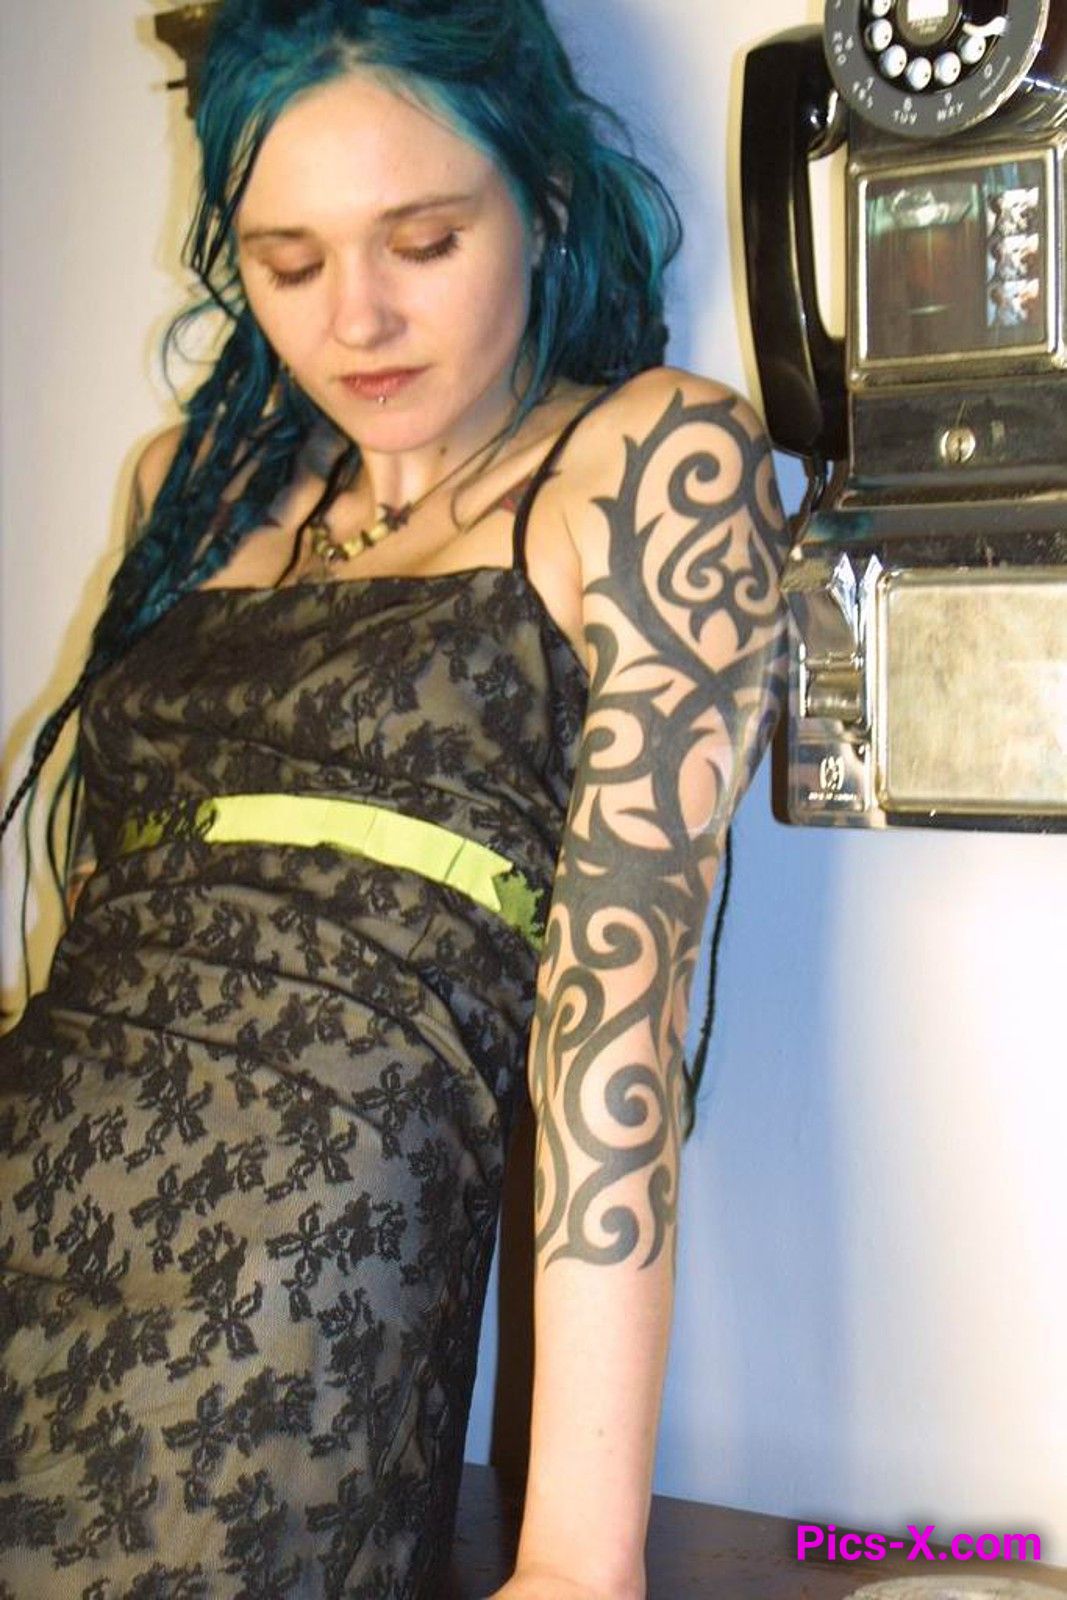 Blue haired punk babe playing with herself on the phone - Punk Rock Girlfriend - Image 1